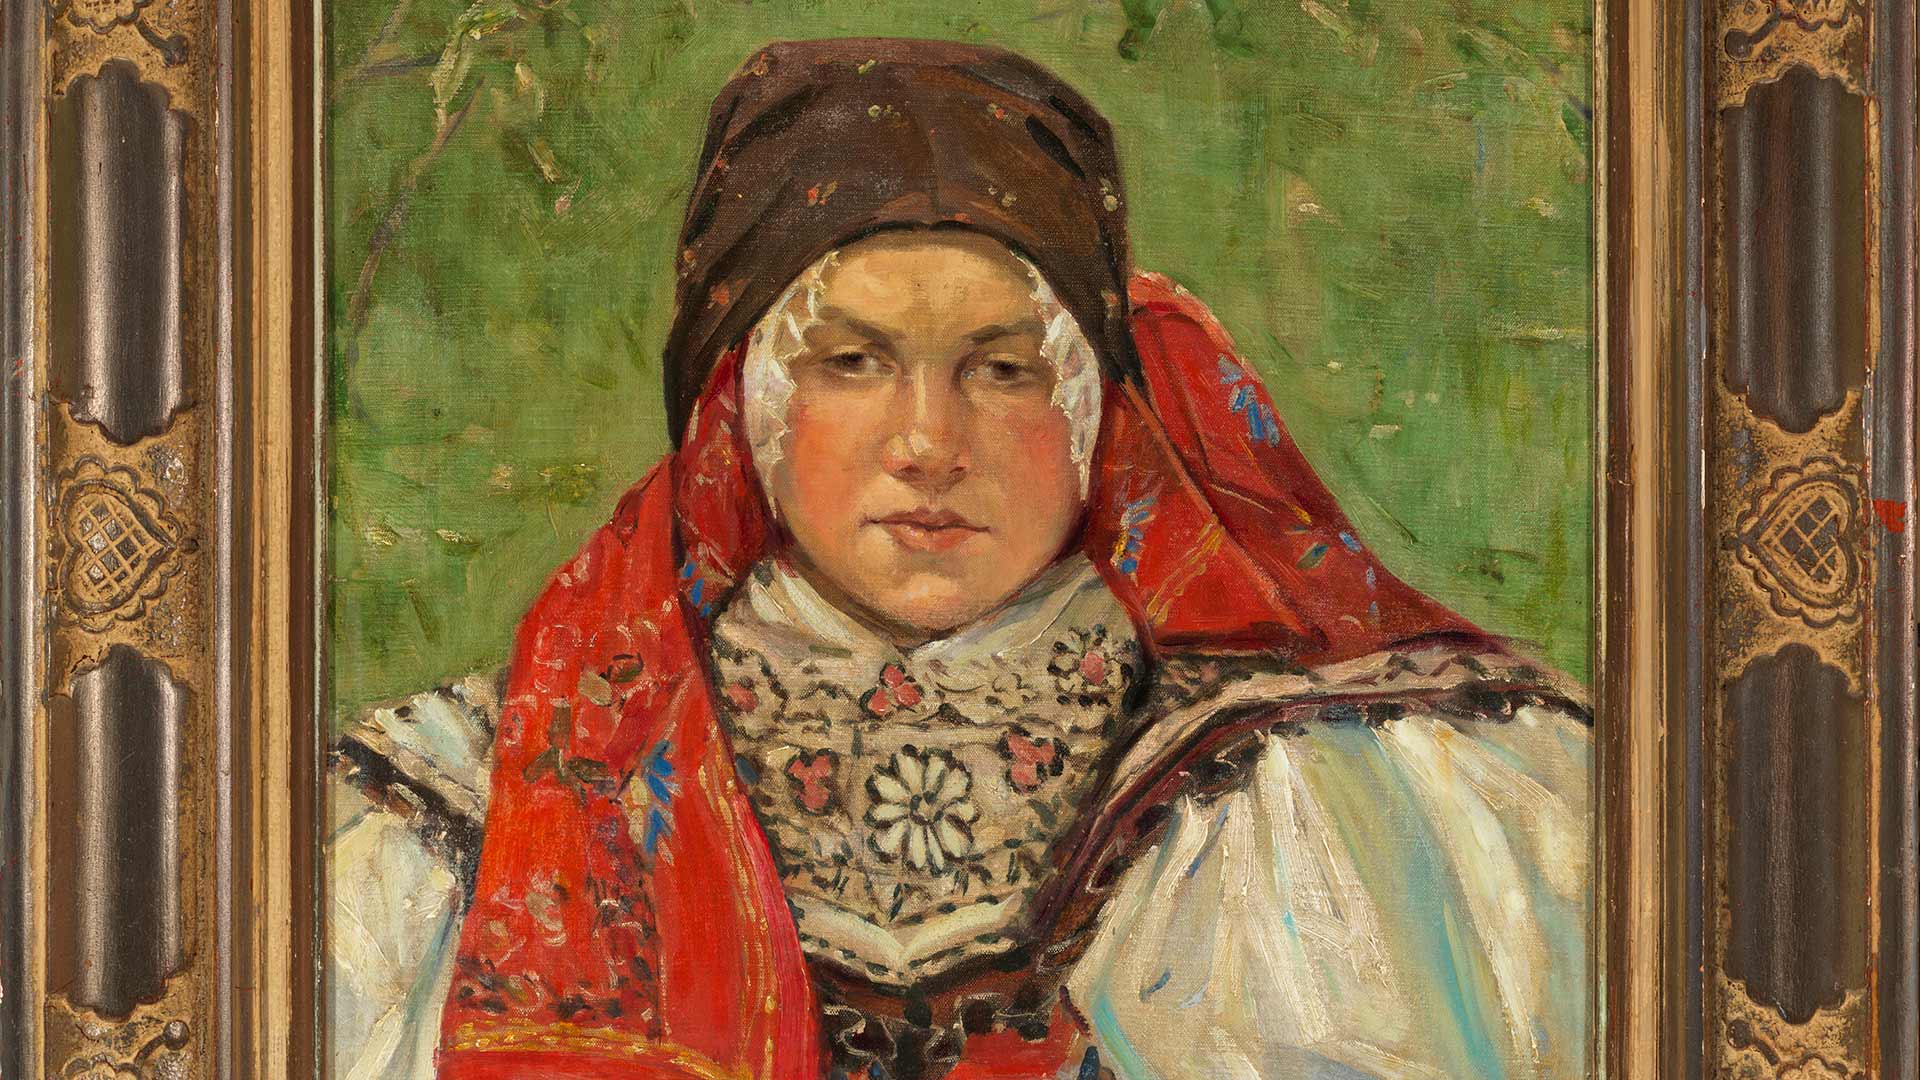 Woman with Headscarf(from Vacenovice or Ratiskovice)by Joža Uprka, c. 1897. Courtesy of George T. Drost.